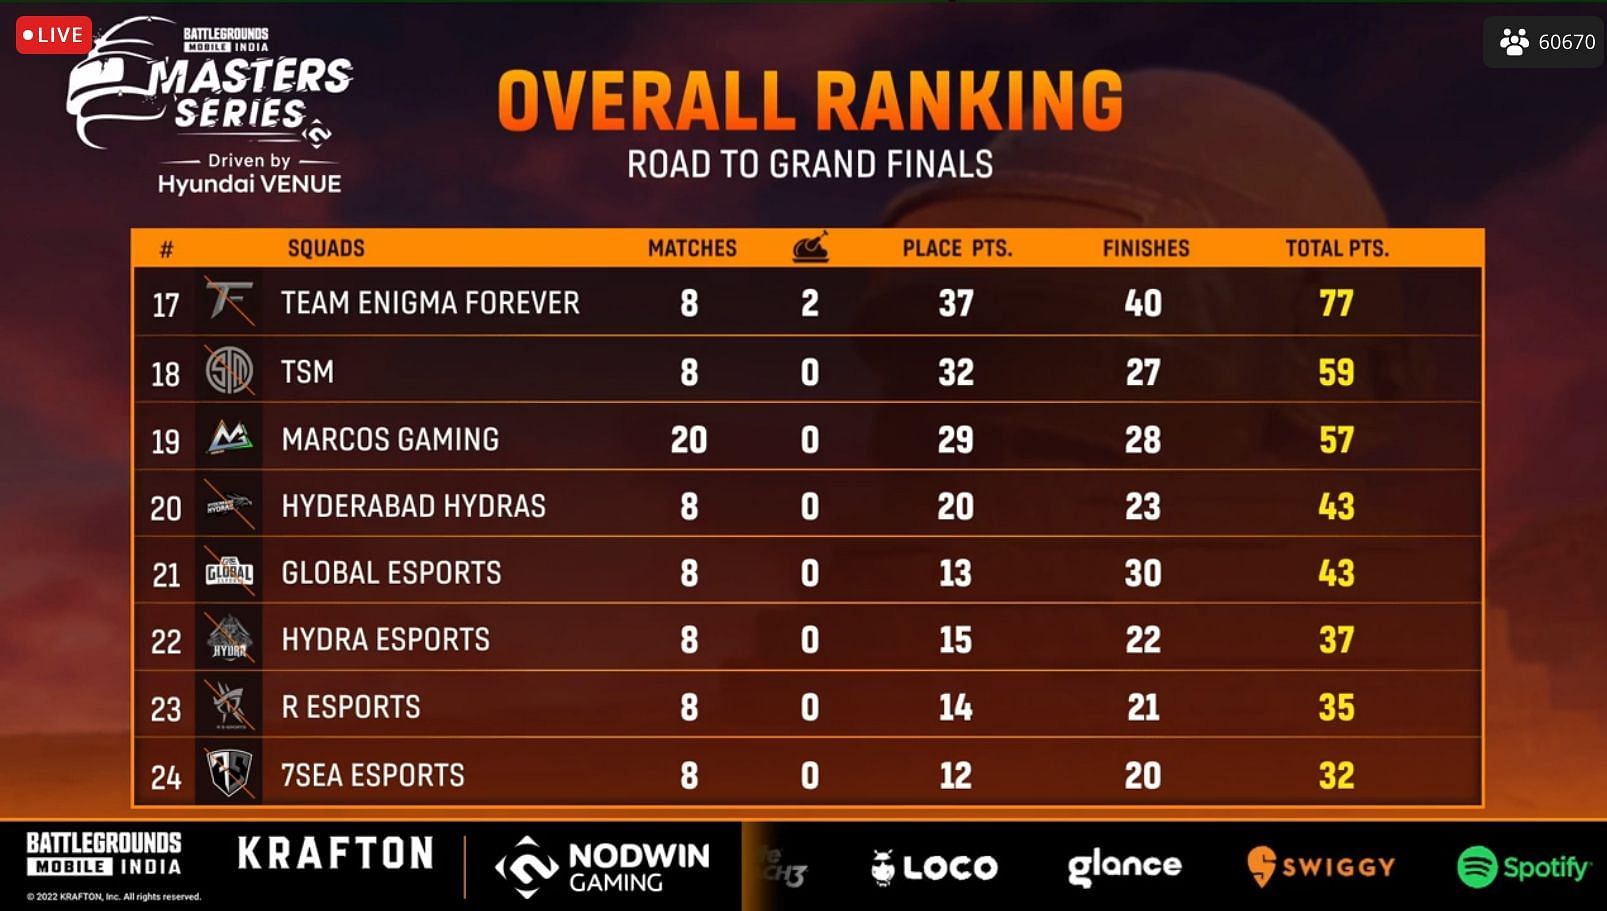 Marcos Gaming finished 19th after week 2 (Image via Loco)